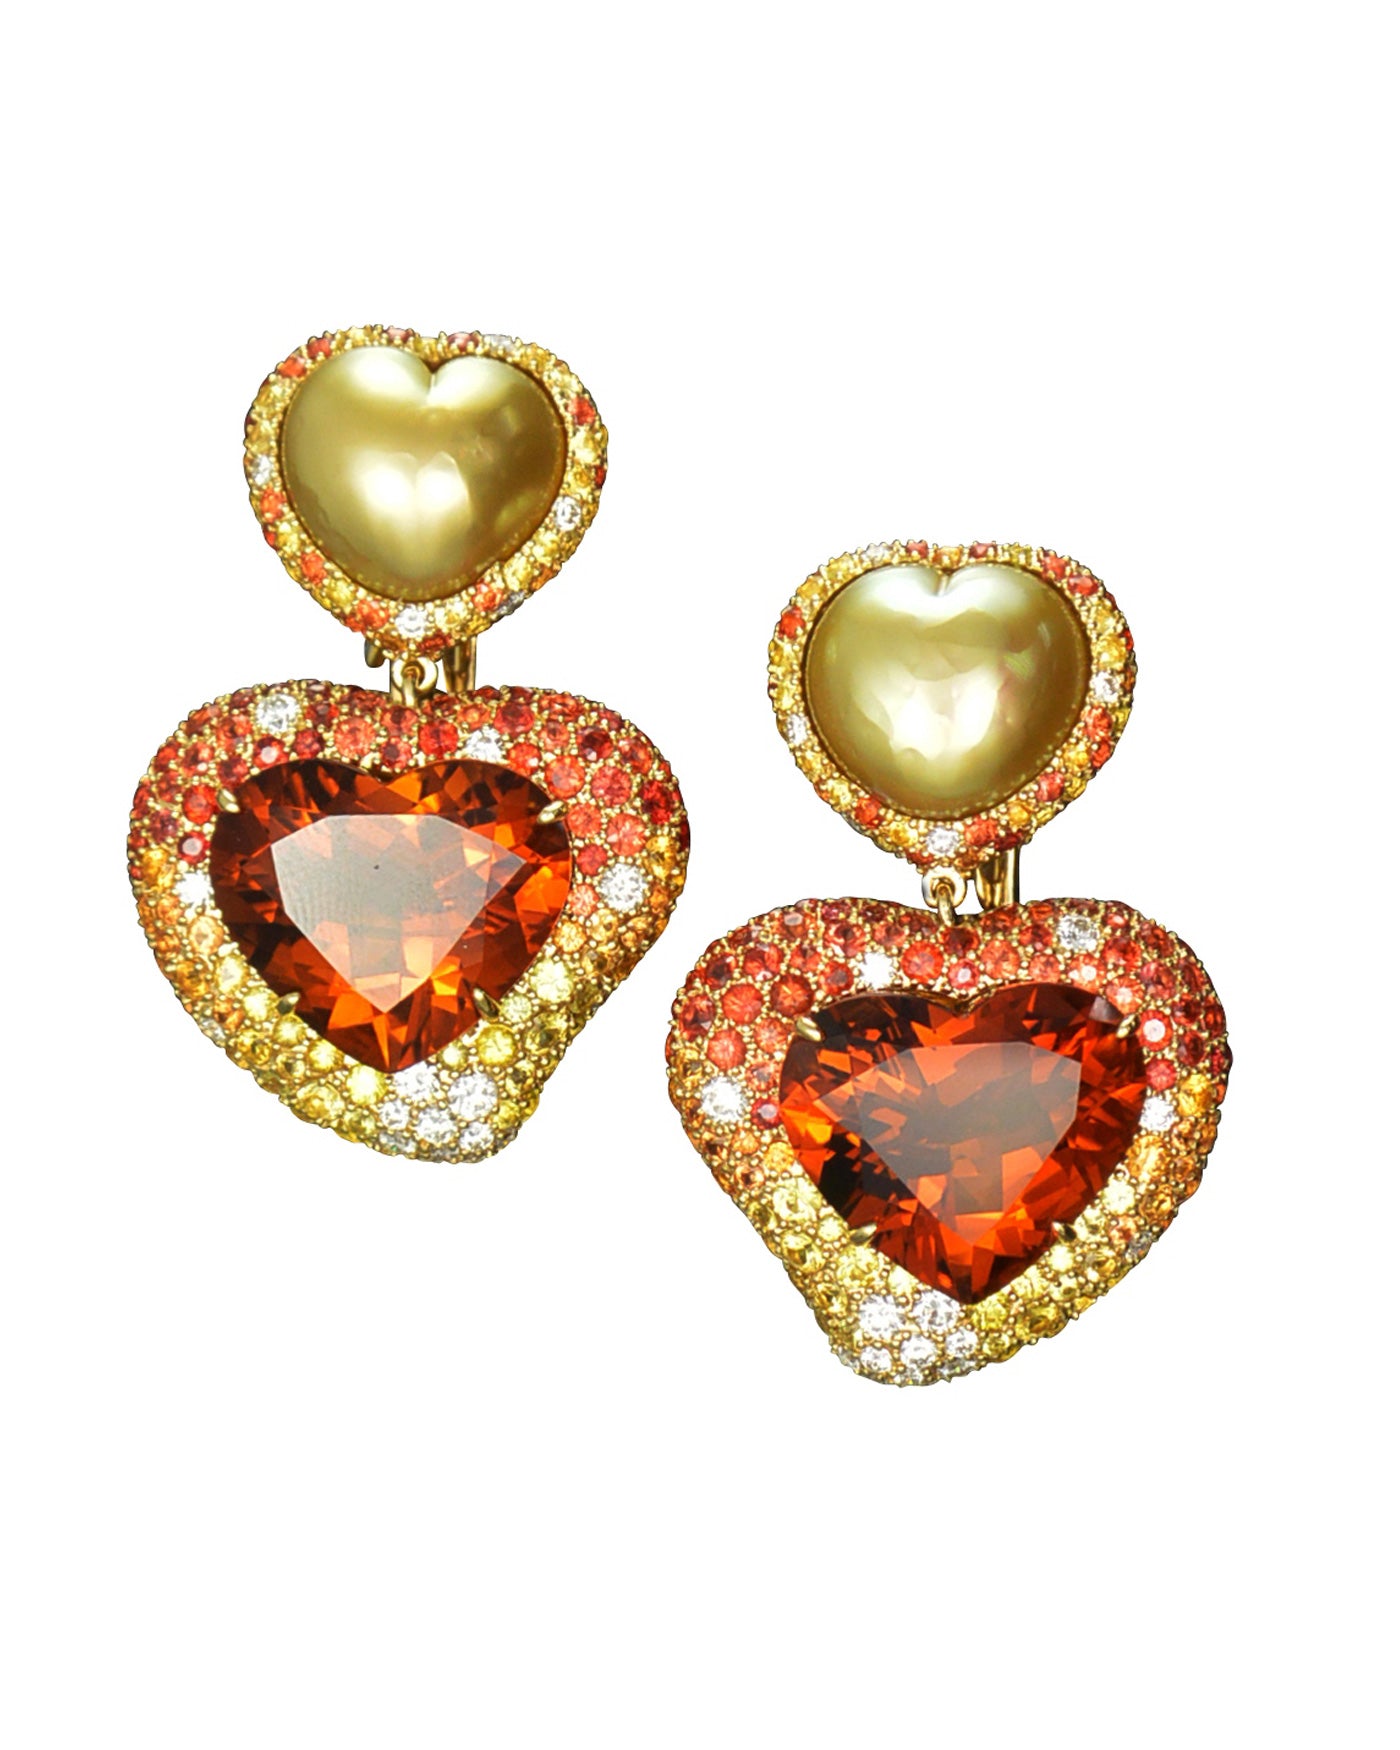 Golden Pearl heart earrings with citrine hearts enhanced with diamonds, yellow and orange sapphires, crafted in 18 karat yellow gold